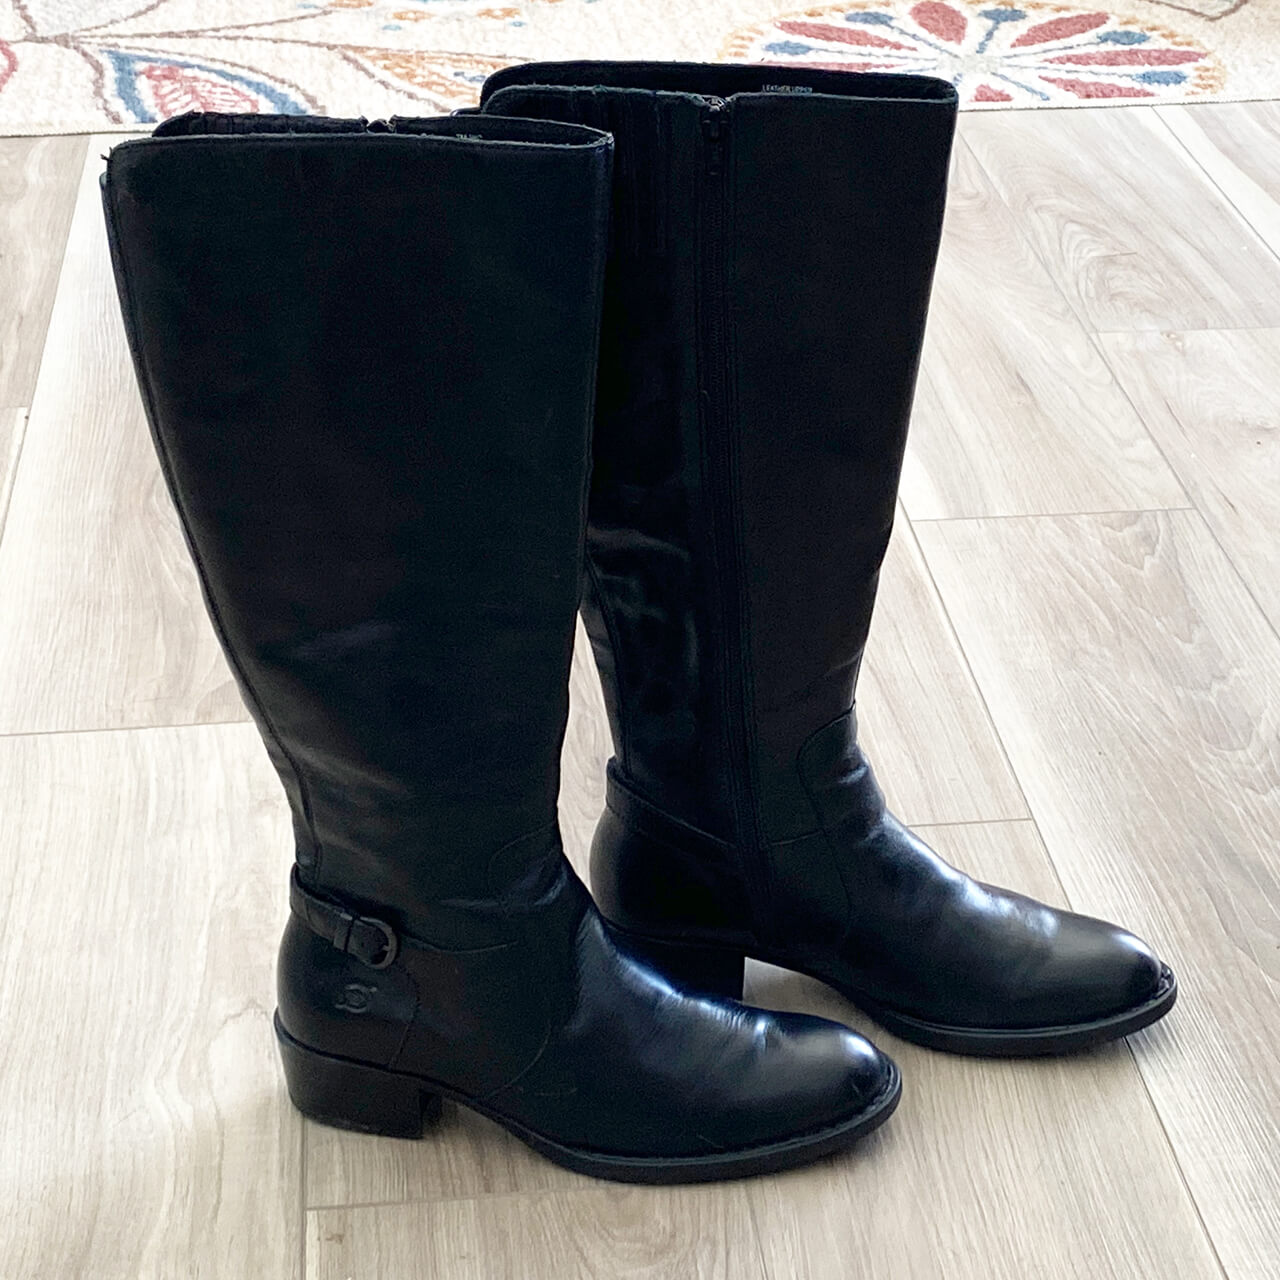 Born Helen Black Knee High Leather Riding Boots, Size 7M